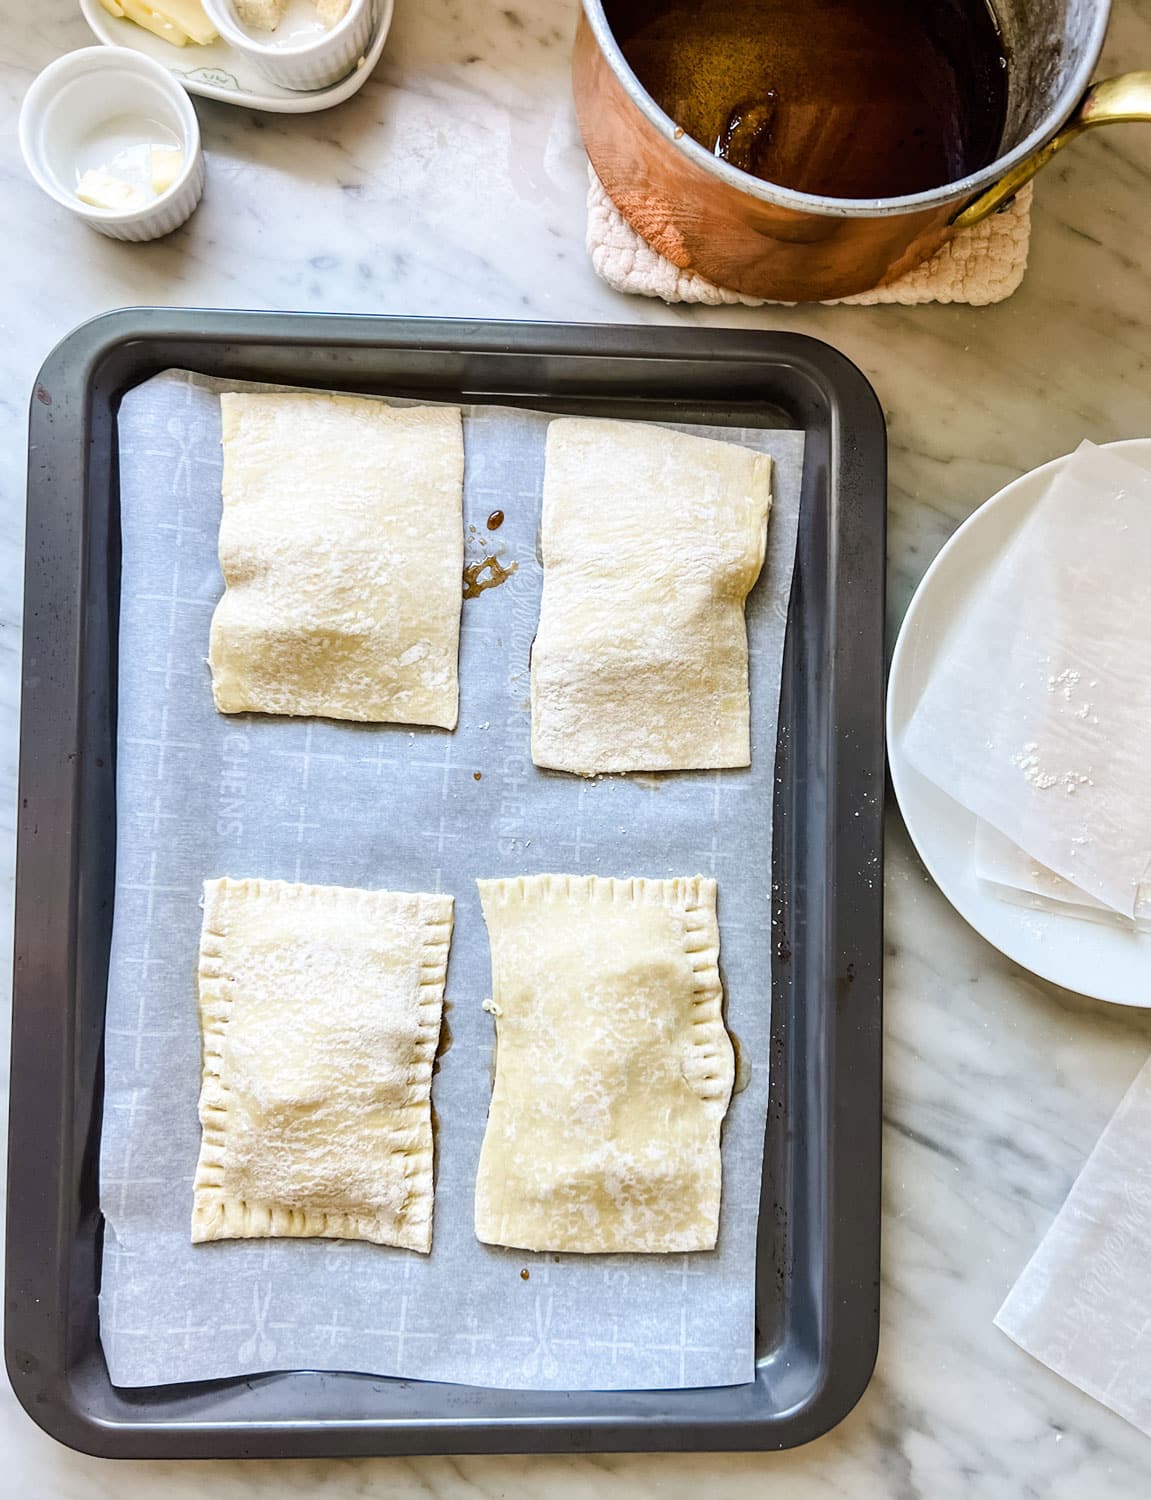 Puff Pastry Dough Sheets 10 x 15